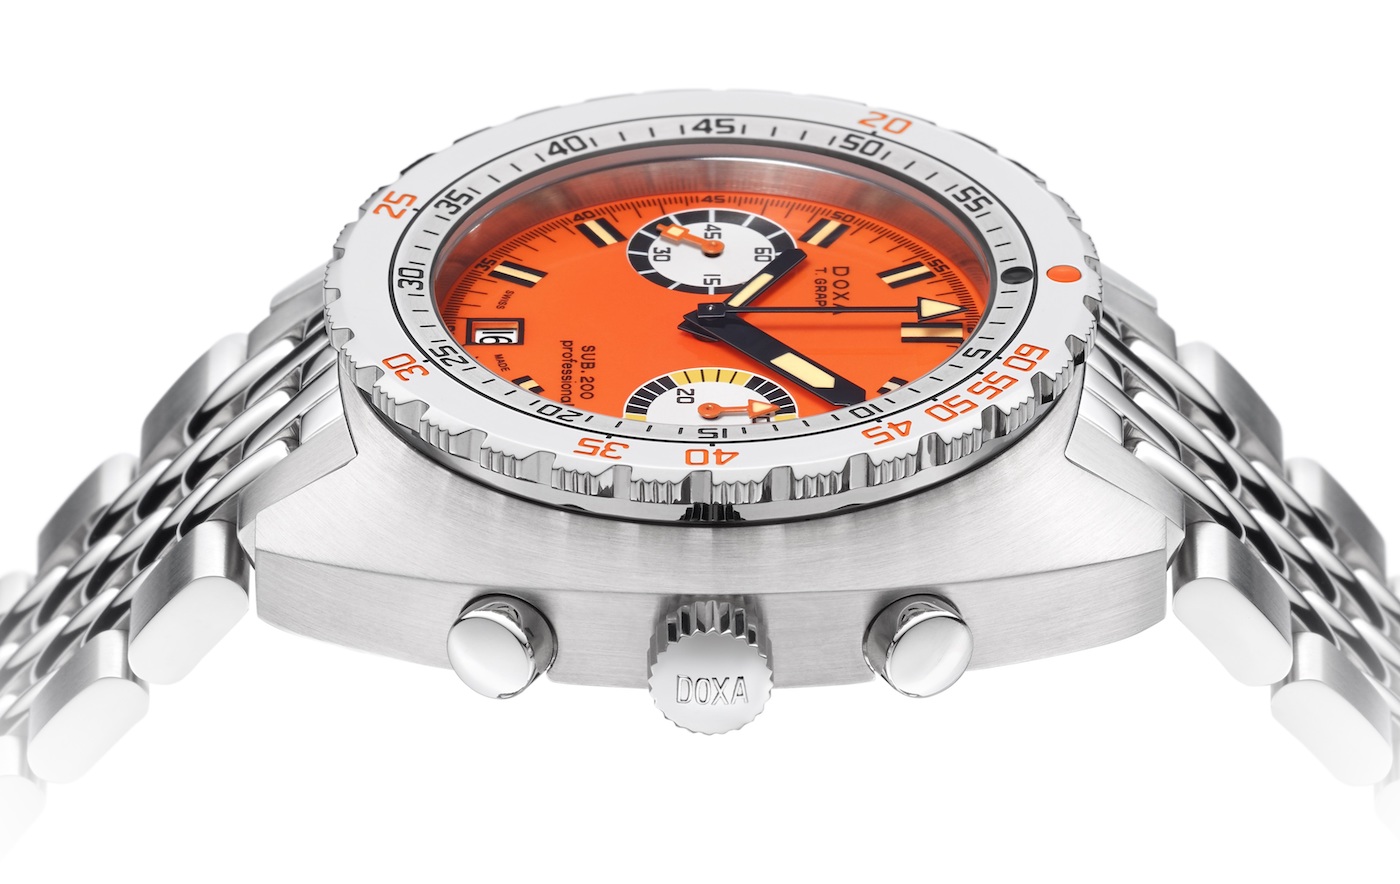 Doxa-Sub-200-T-Graph-Watch-In-Stainless-Steel